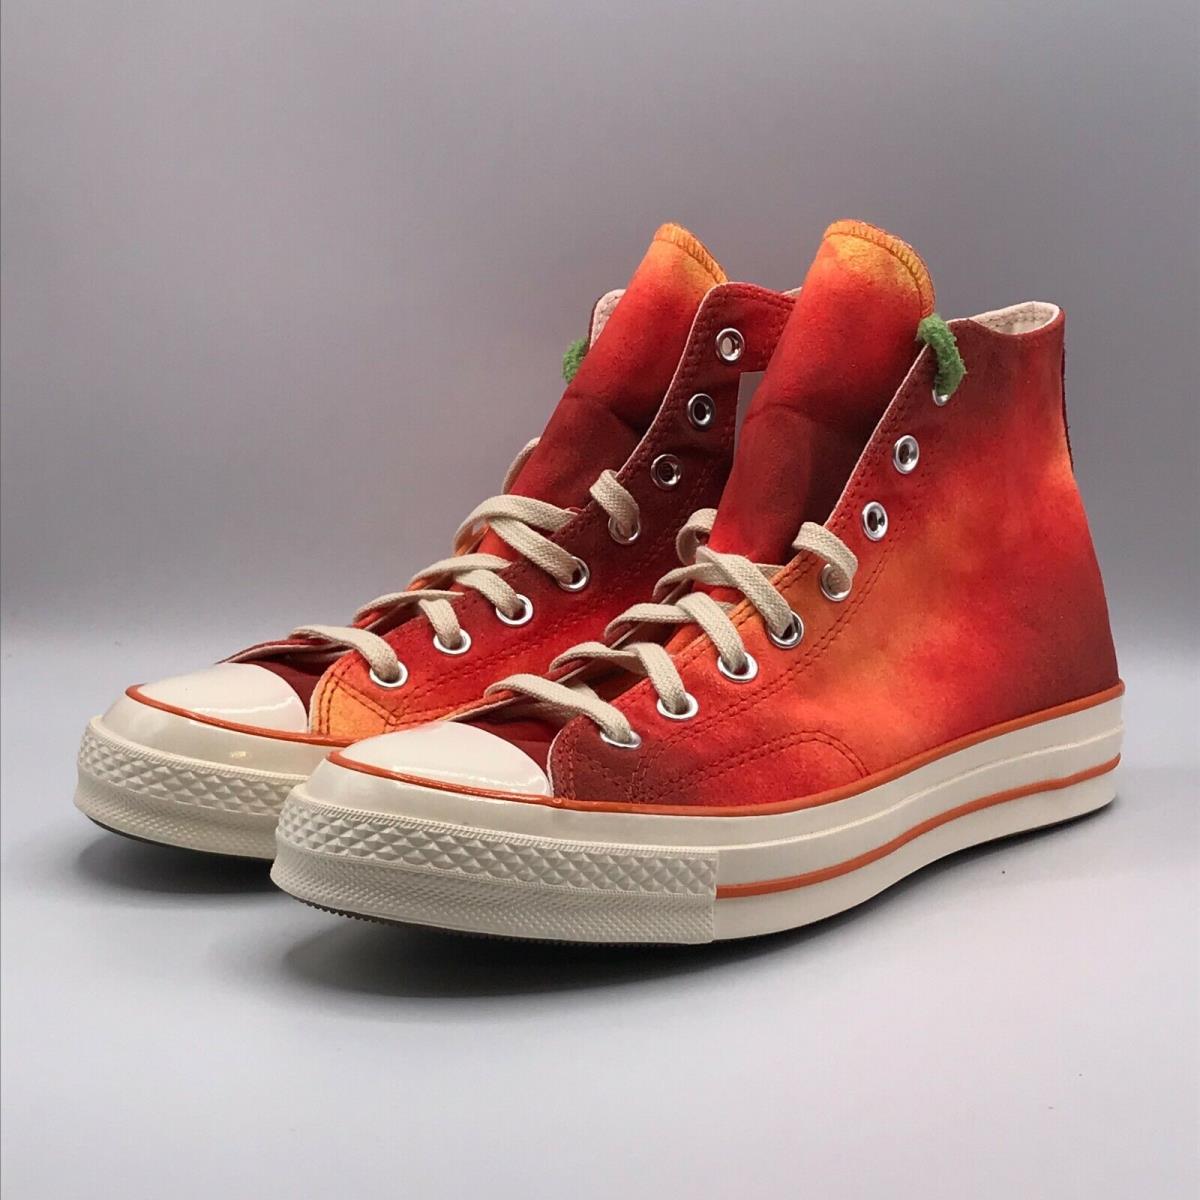 Converse Concepts Shoes Mens 10 Chuck 70 High Southern Flame Orange Red Sneakers